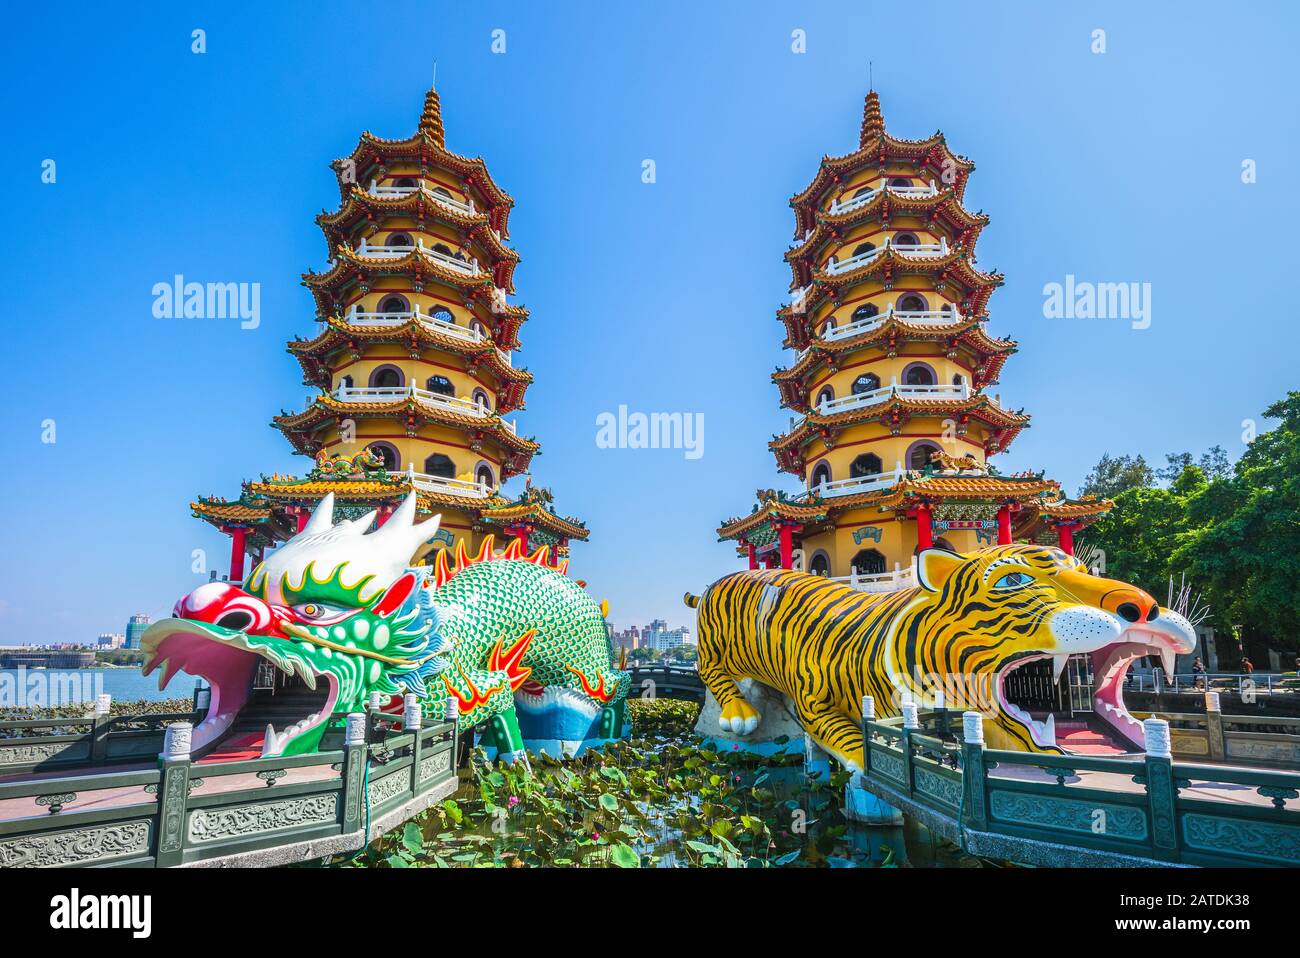 Tigre Dragon Tower à Kaohsiung, Taiwan Banque D'Images